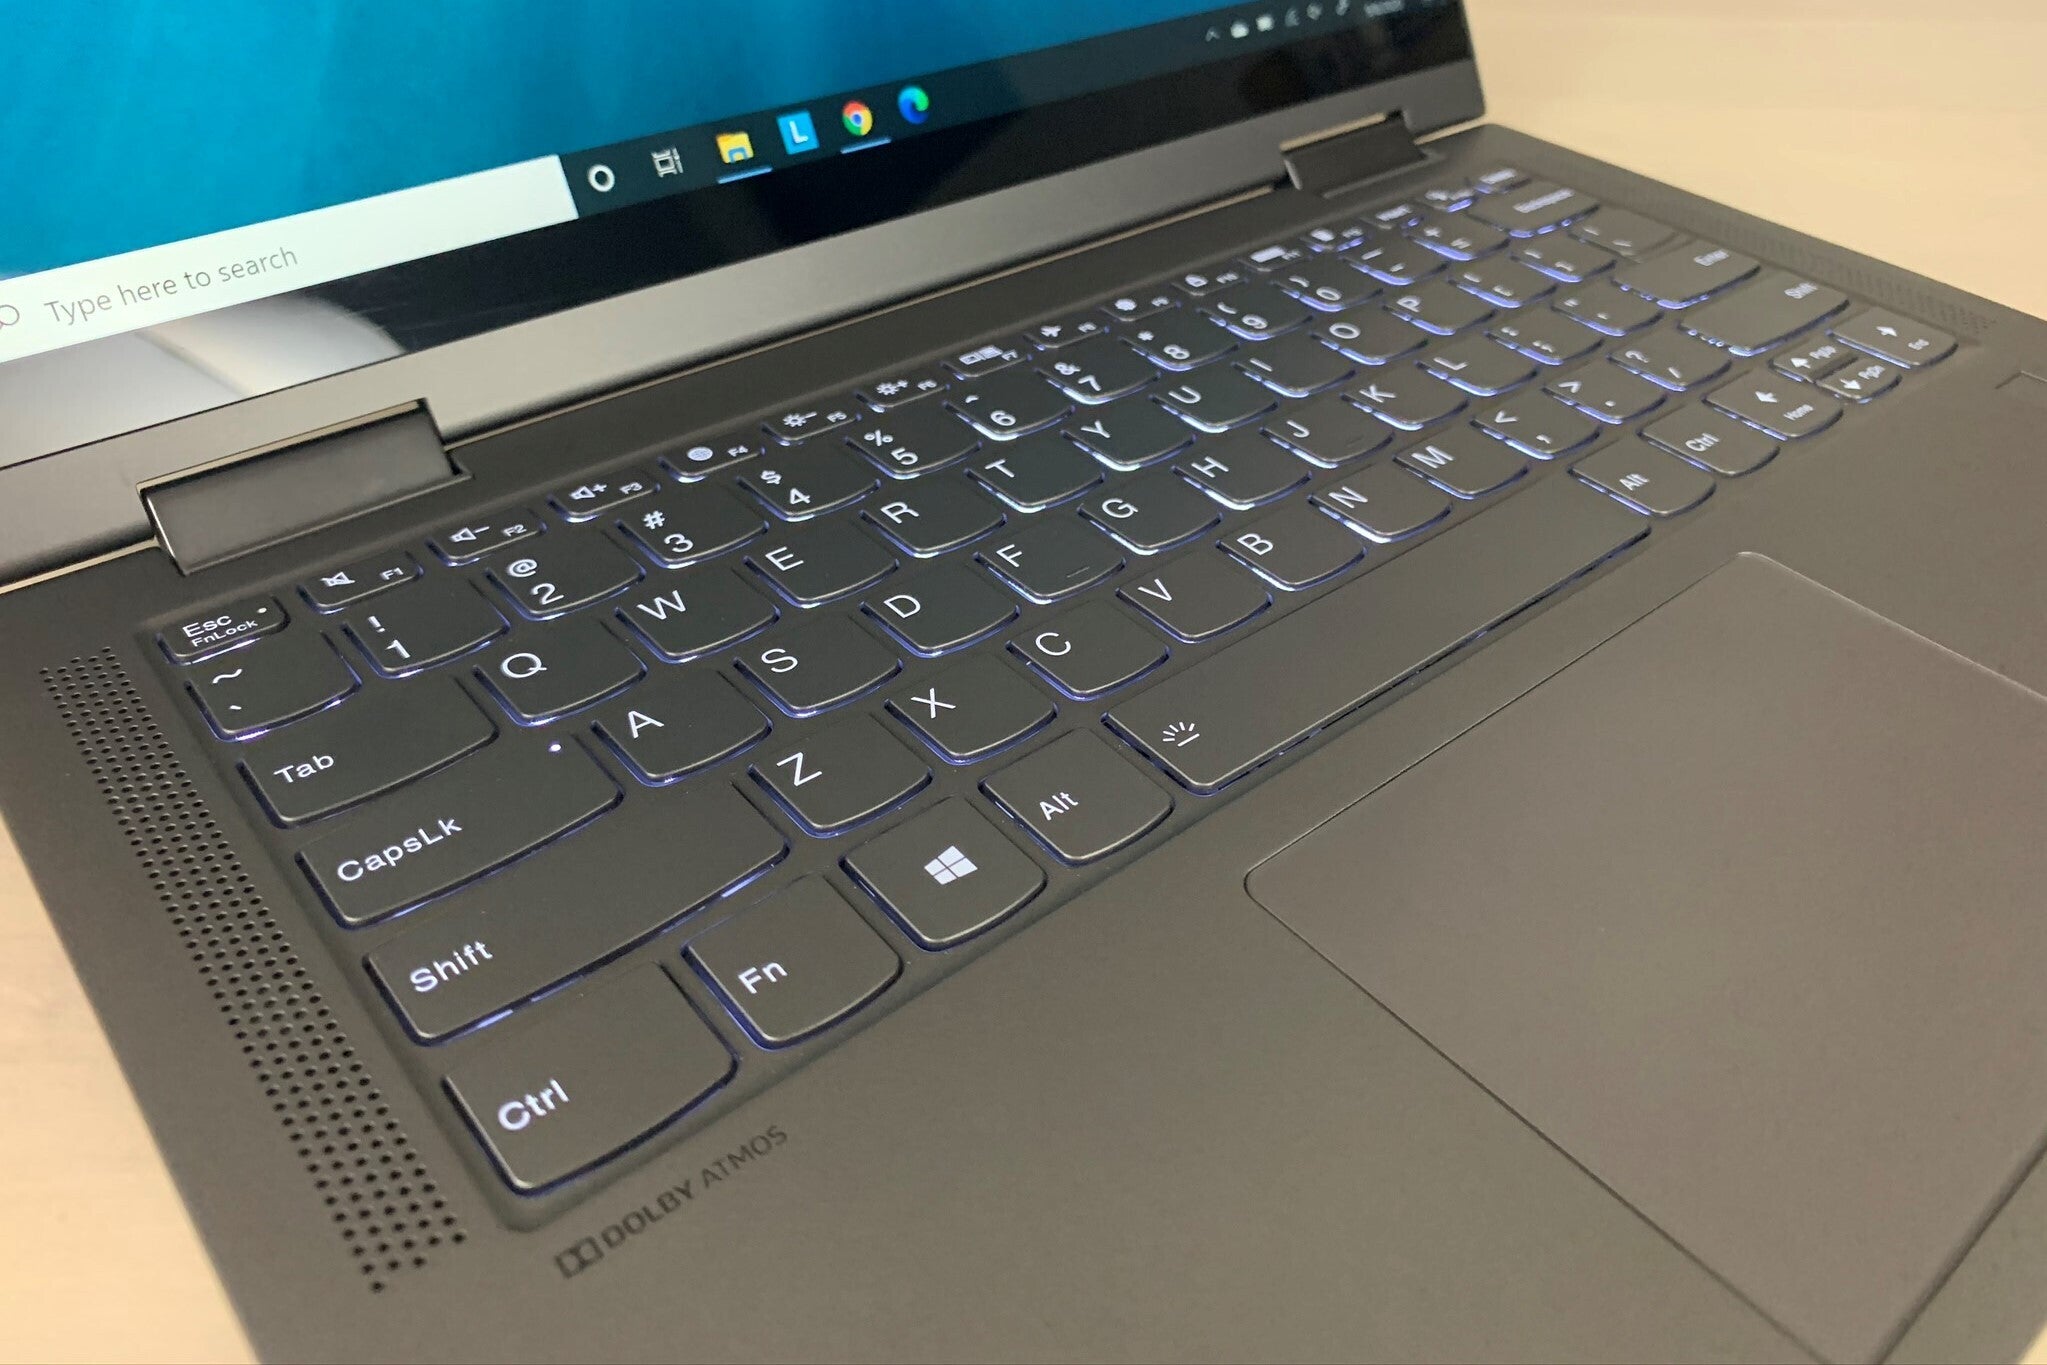 Lenovo Flex 5G review: The first 5G laptop offers crazy battery life, as well as compromises